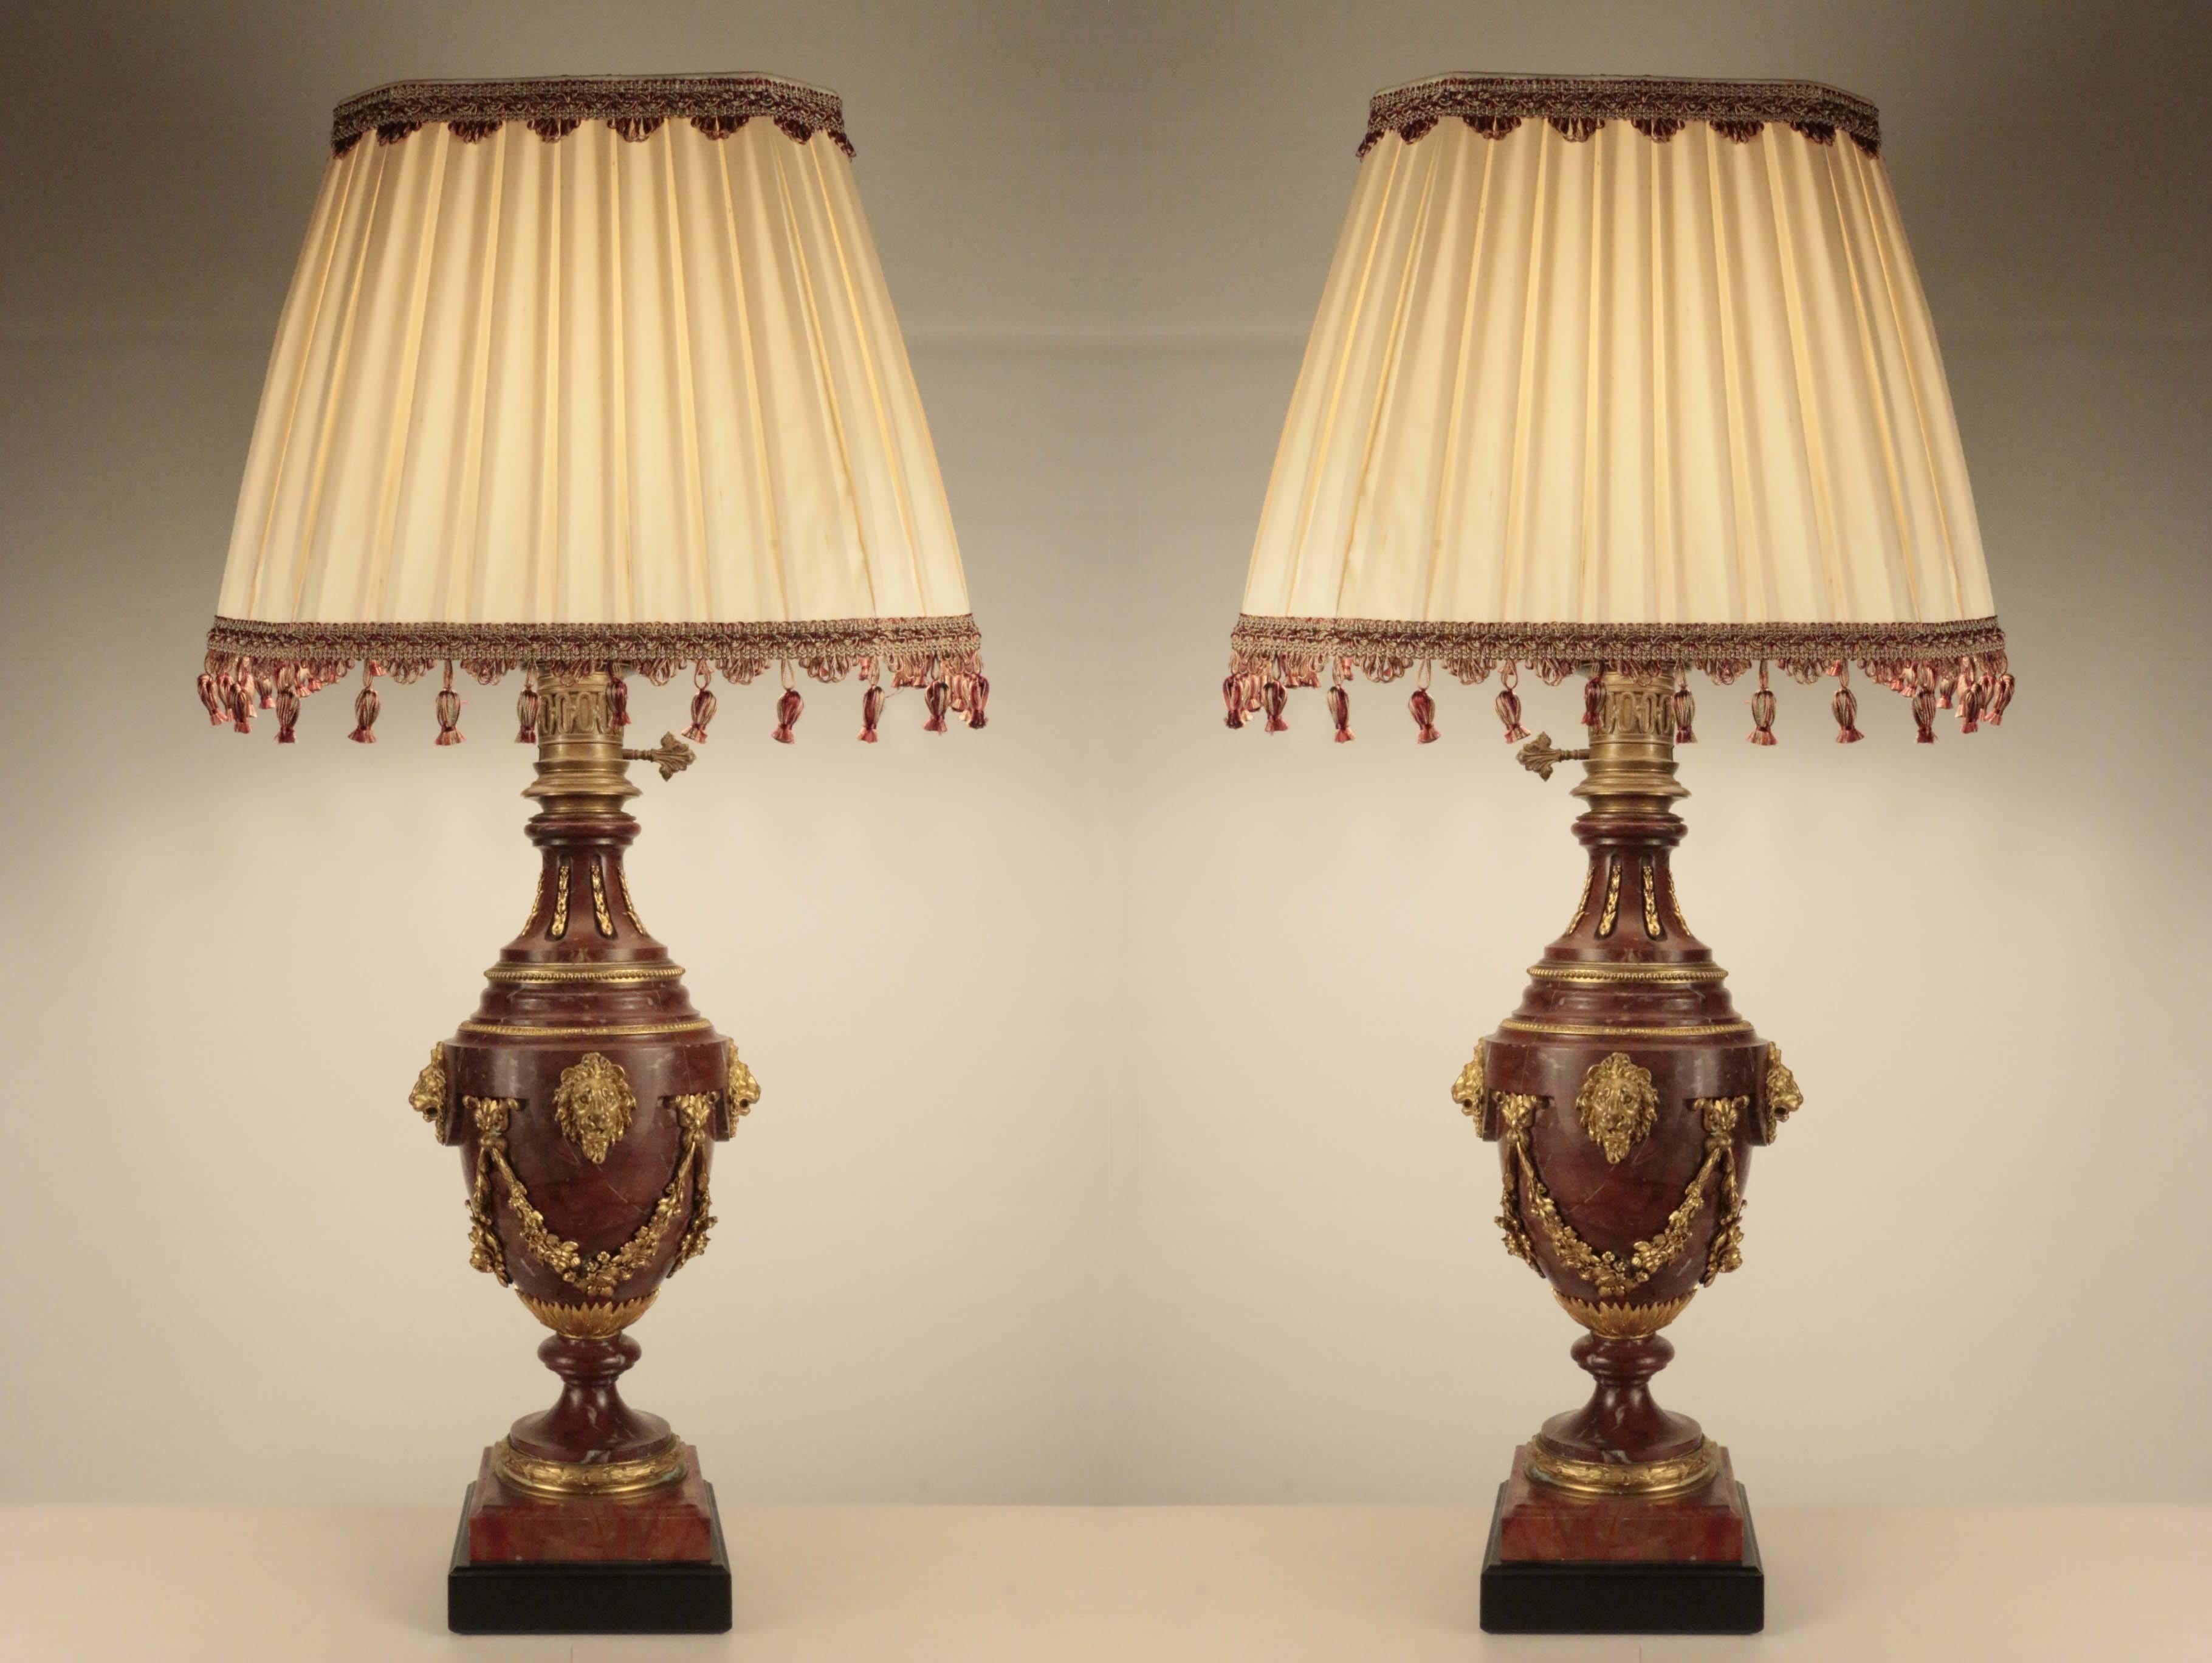 Pair of rouge marble and gilt bronze baluster shaped oil lamps, later fitted for electricity, the necks and bodies decorated with gilt bronze banding and garlands and accented with lions' heads; supported on marble socles on ebonized wood bases.